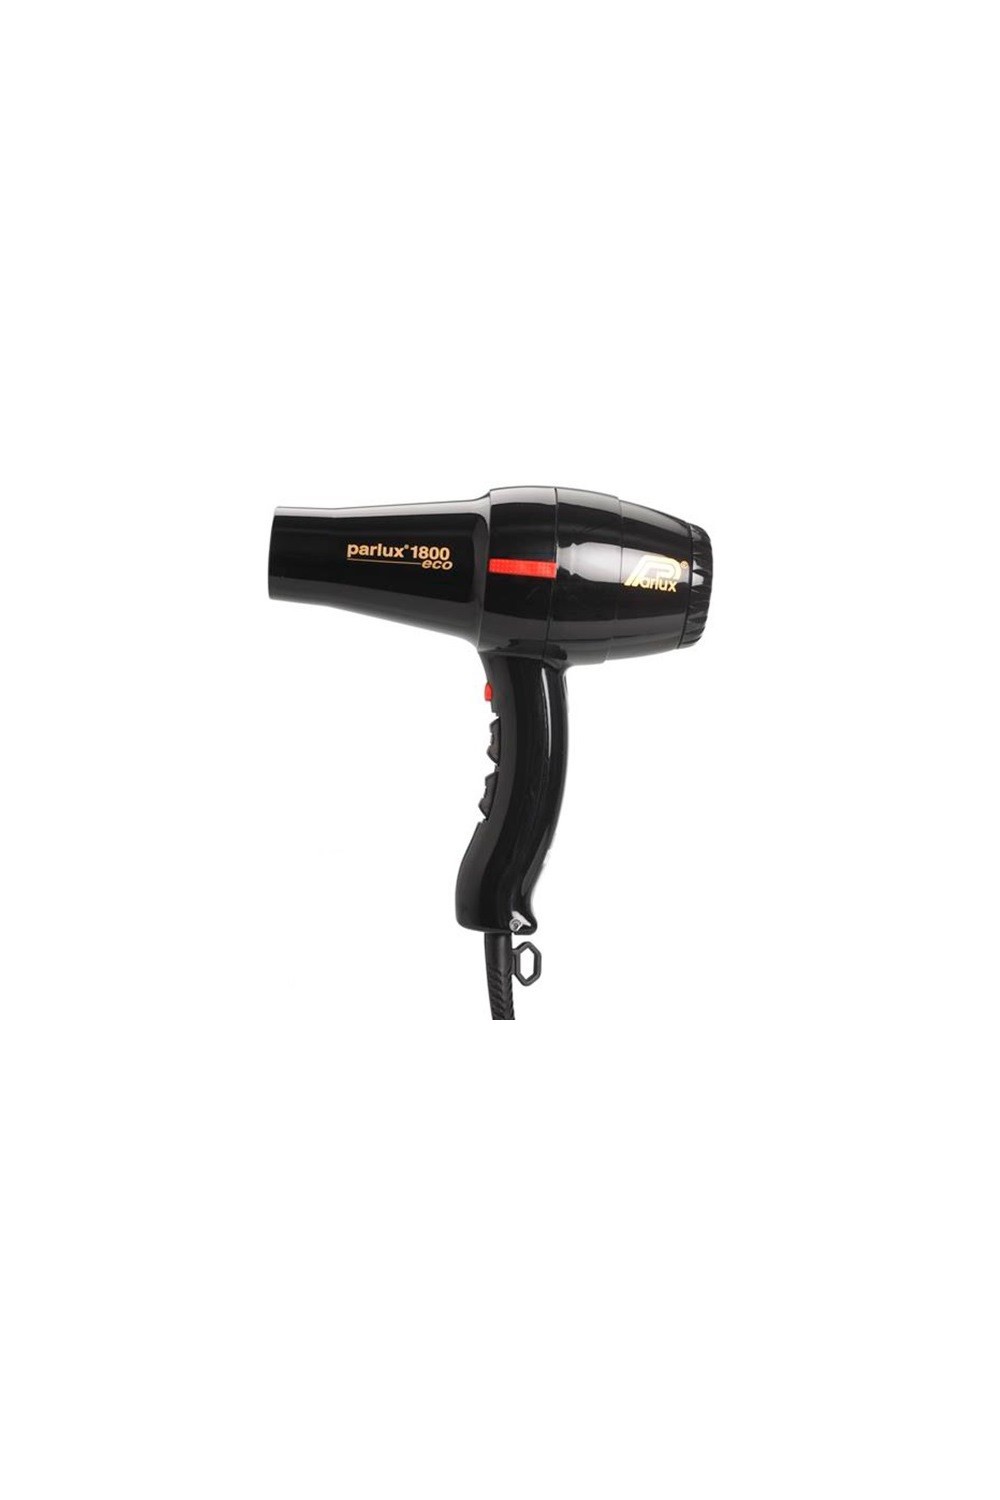 Parlux Hair Dryer 1800 Eco Edtition Black